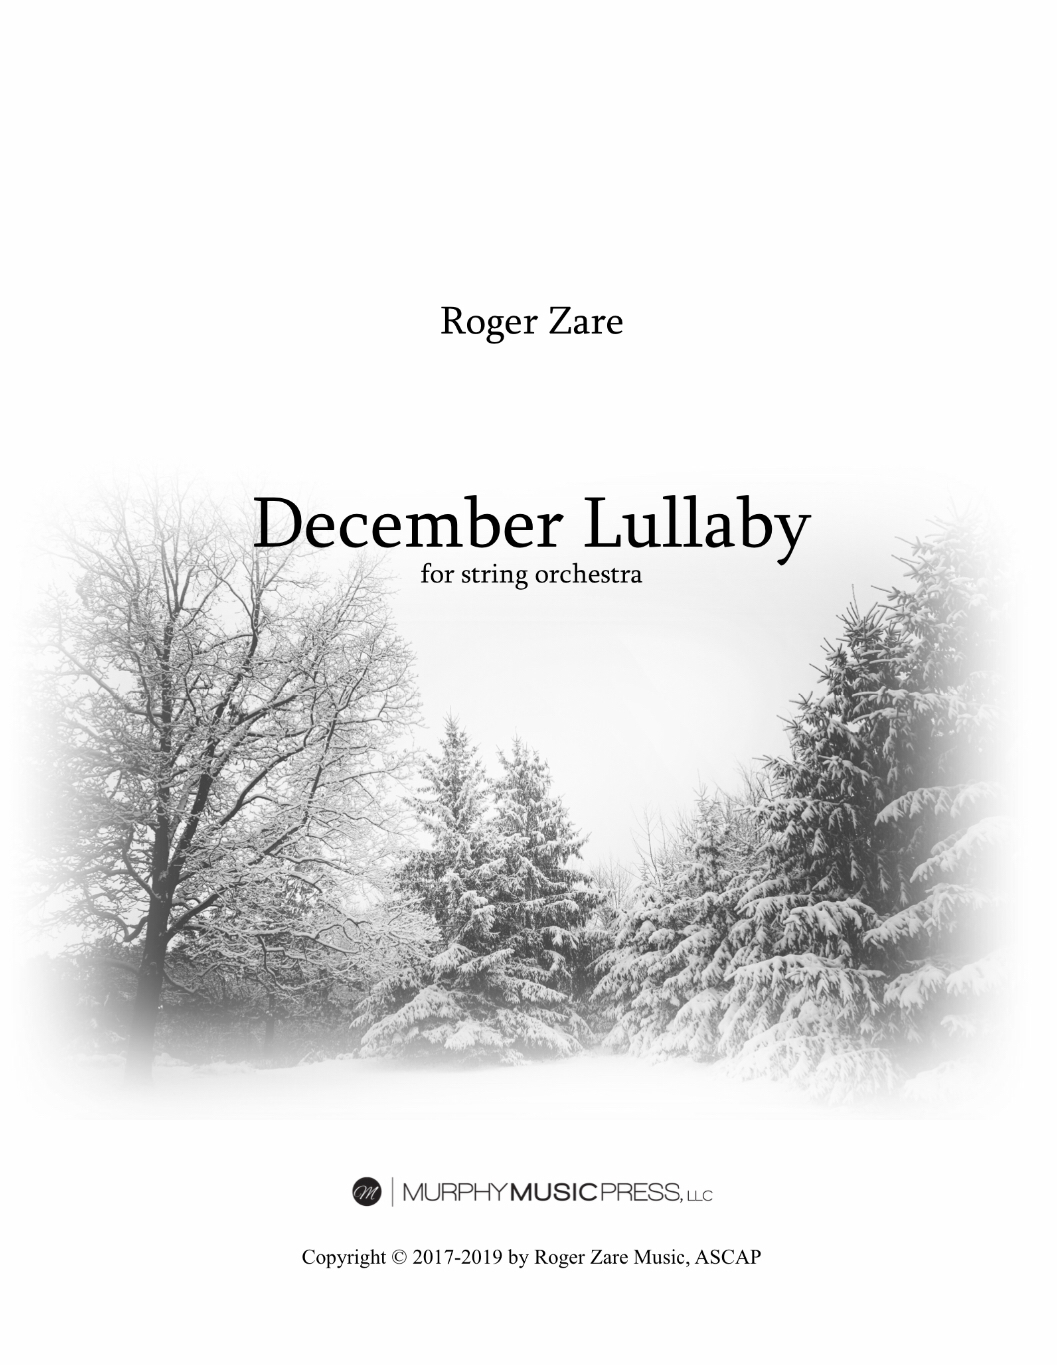 December Lullaby (String Orchestra Version)  by Roger Zare